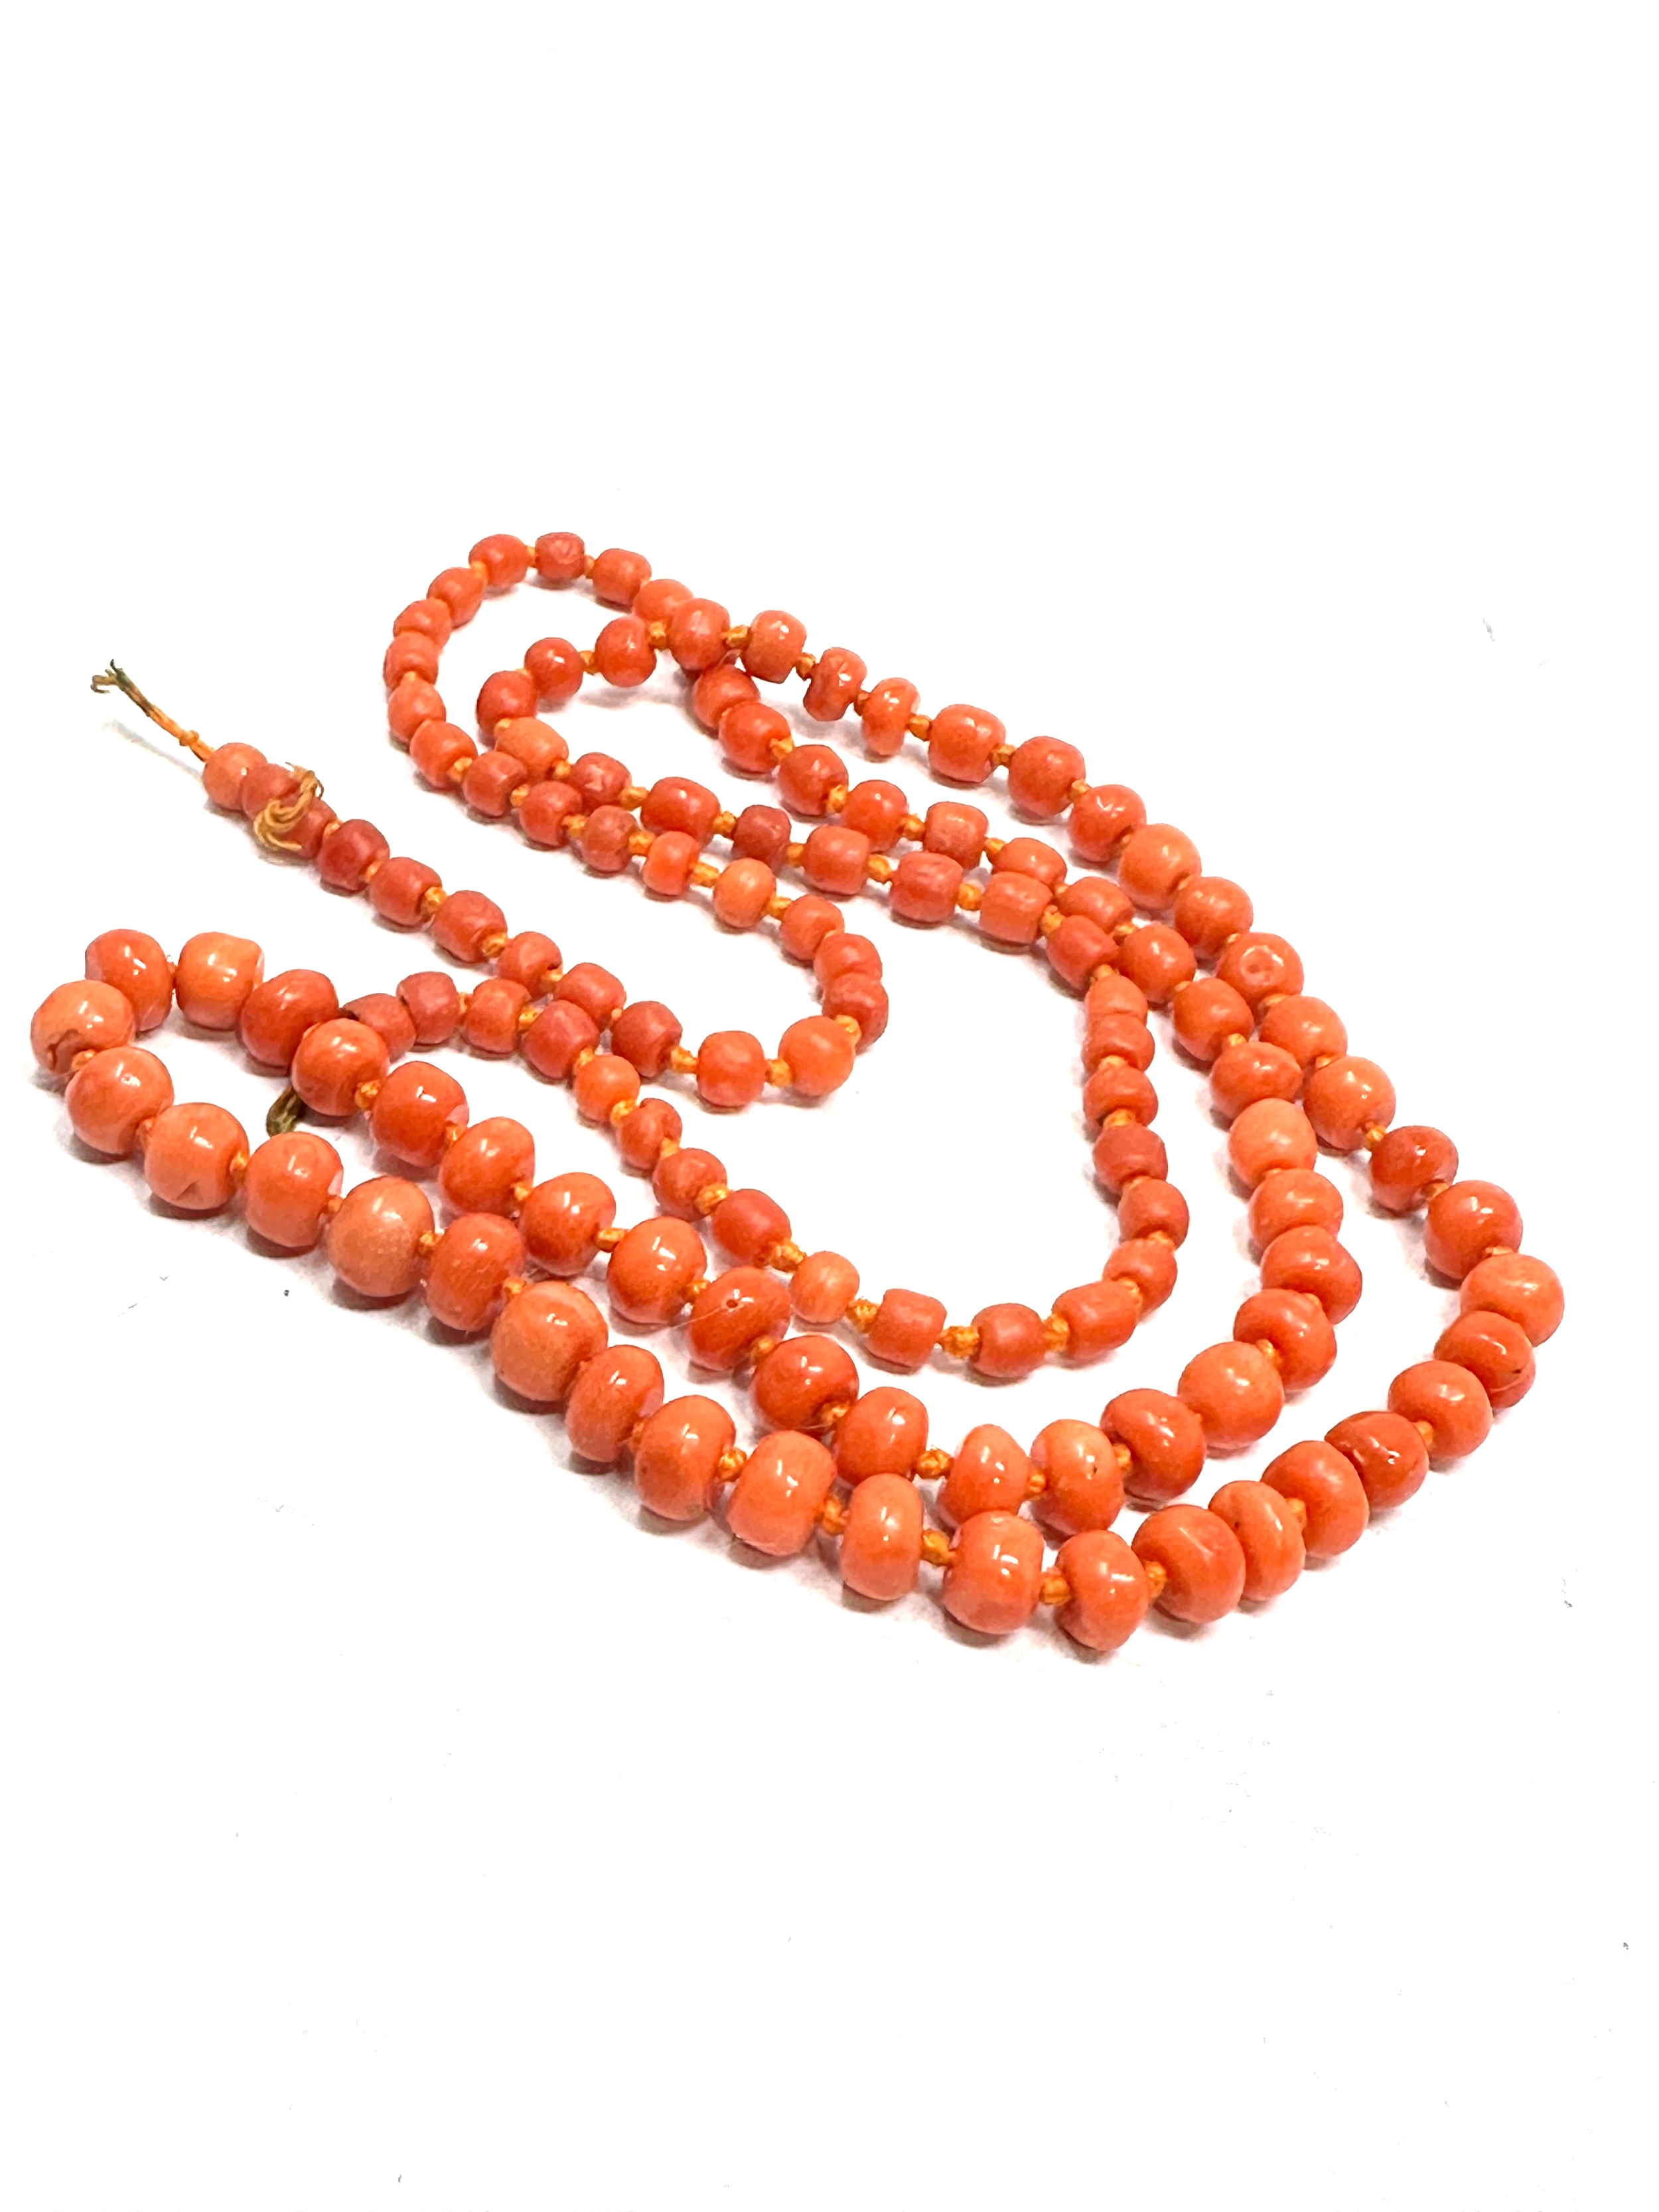 Antique graduated coral bead necklace measures approx 75 cm long weight 30g - Image 4 of 4